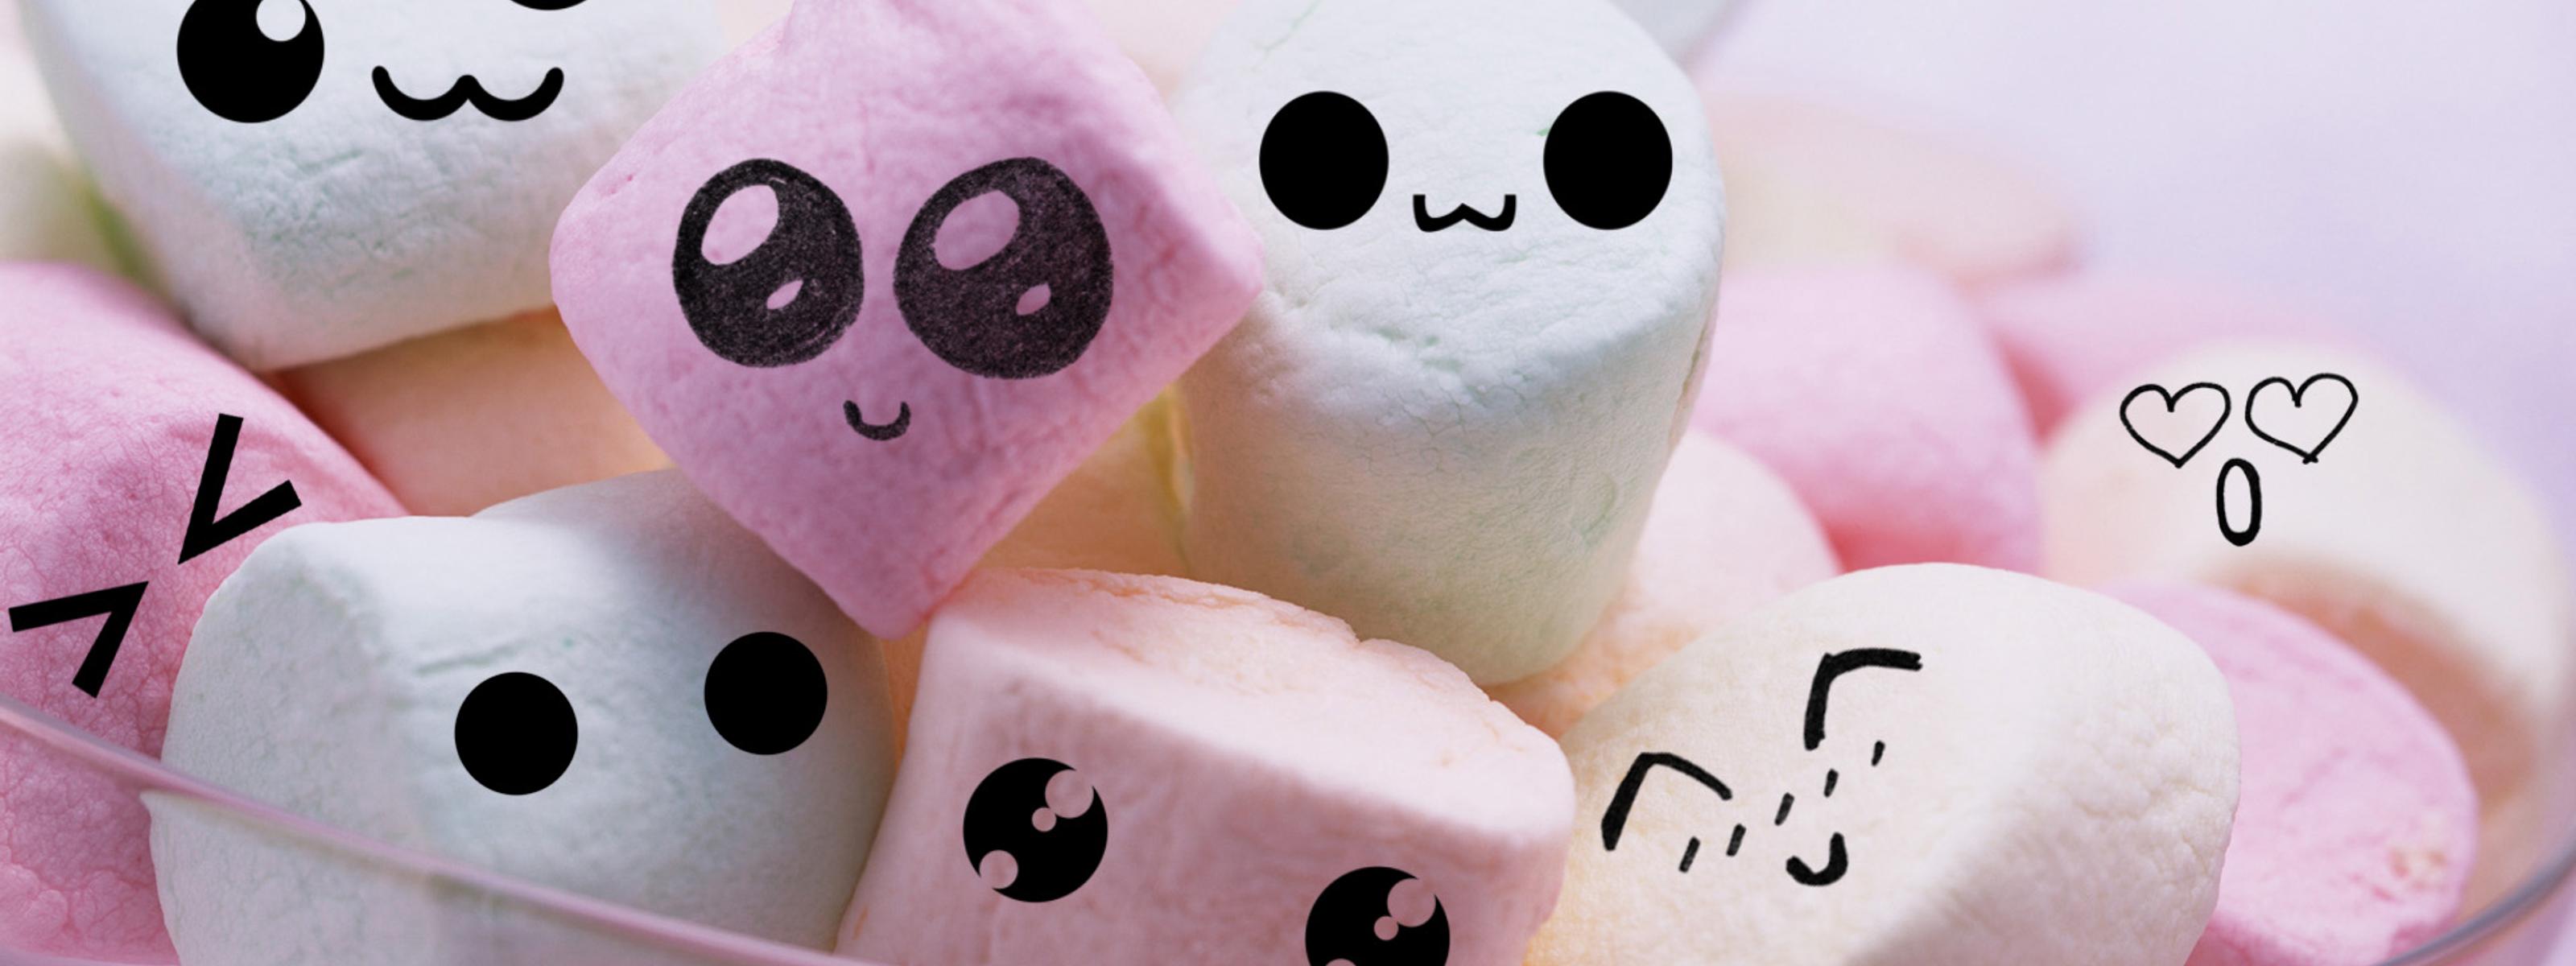 Cute and funny faces on marshmallows